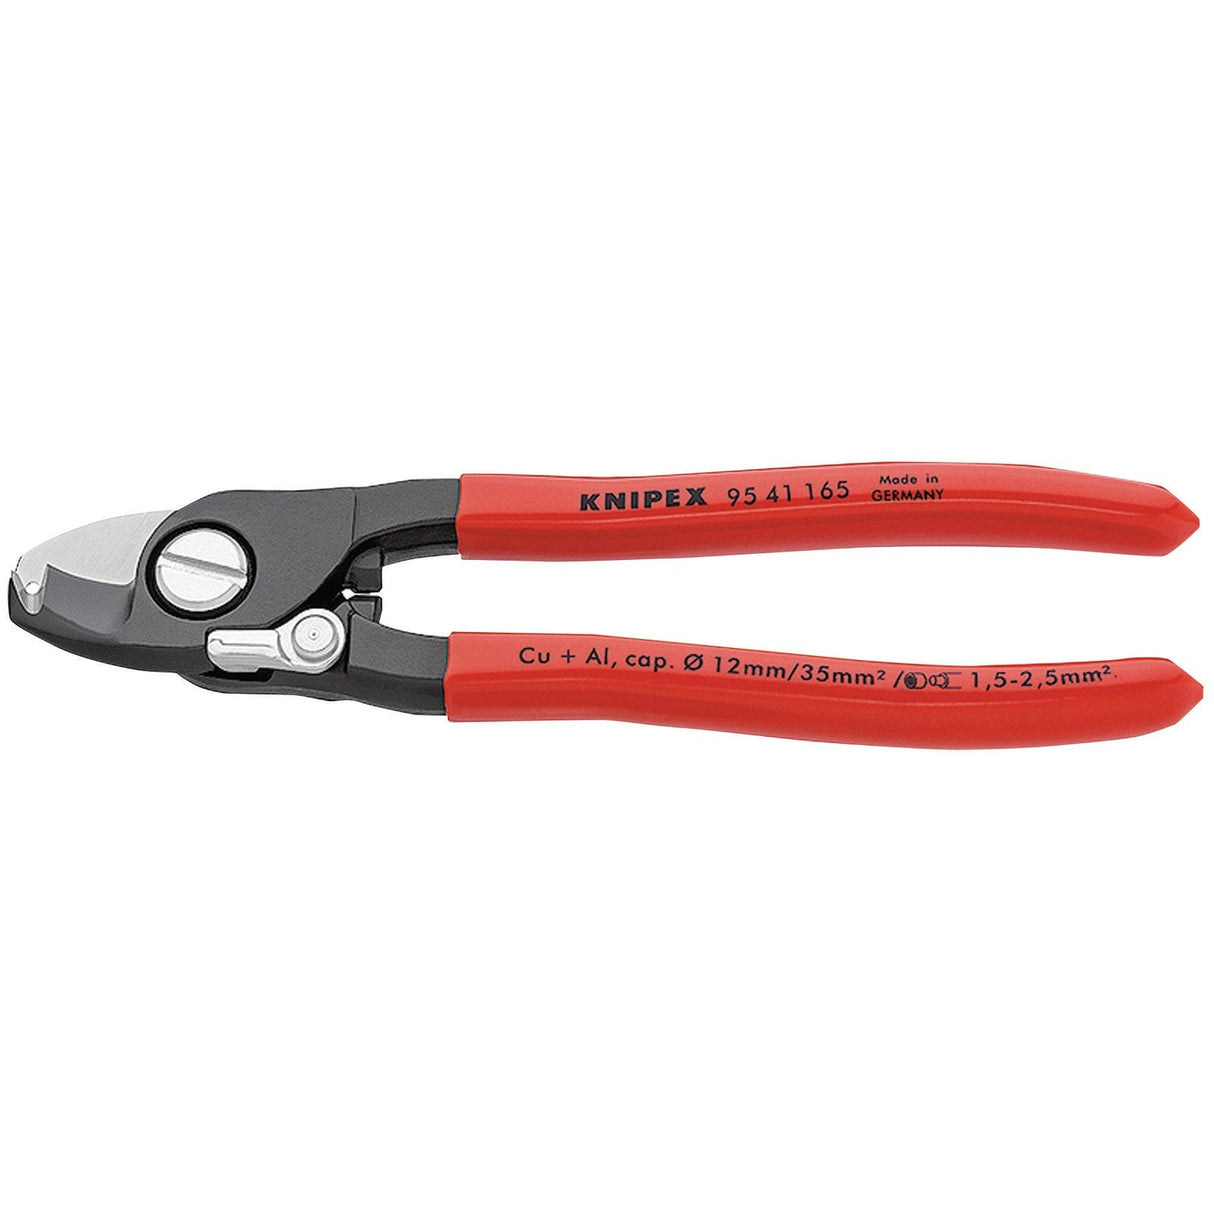 Draper Knipex 95 41 165Sbe Copper Or Aluminium Only Cable Shear With Sprung Handles, 165mm - 95 41 165 - Farming Parts